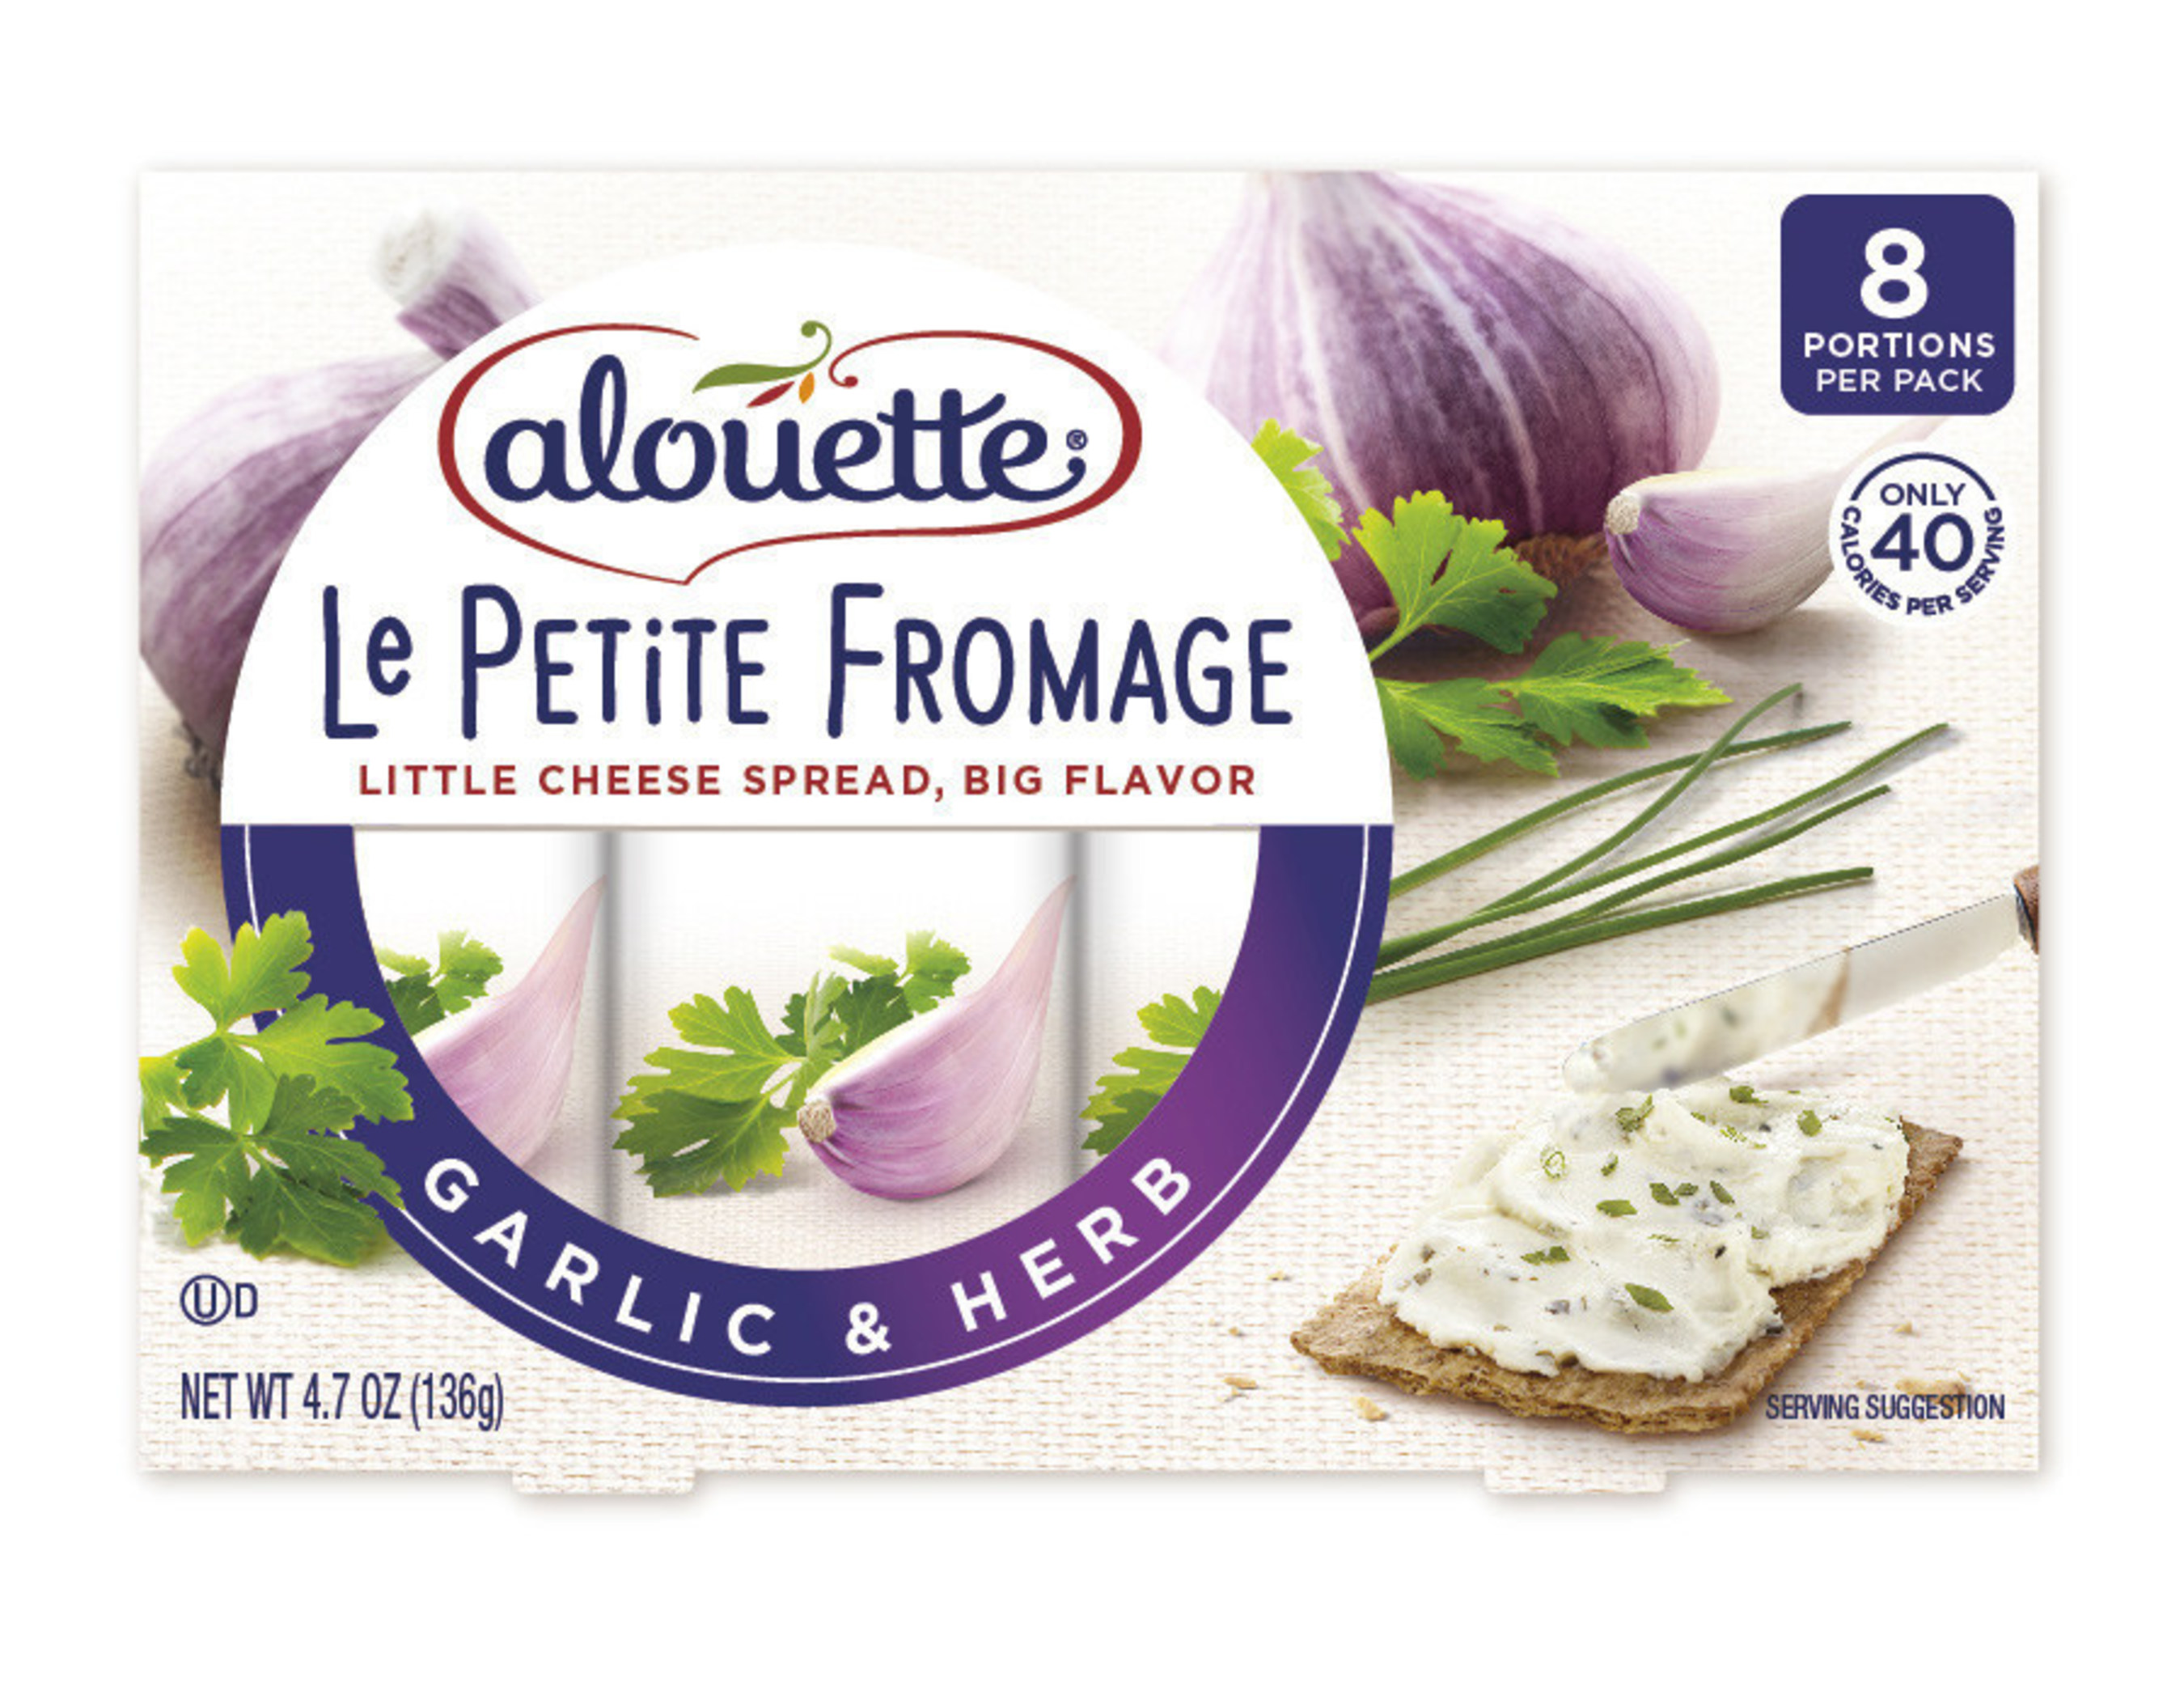 Real ingredients are no laughing matter! Alouette's NEW Le Petite Fromage ($3.99 at grocery stores nationwide), a unique, perfectly-portioned smart snacking spread, makes it easier than ever to eat real. Completely free of artificial ingredients - no additives, preservatives, artificial flavors, or colors - Le Petite Fromage blends indulgent cheese and a touch of yogurt with vegetables picked at peak season and bold spices for a little cheese with big flavor. Individually-packaged with...